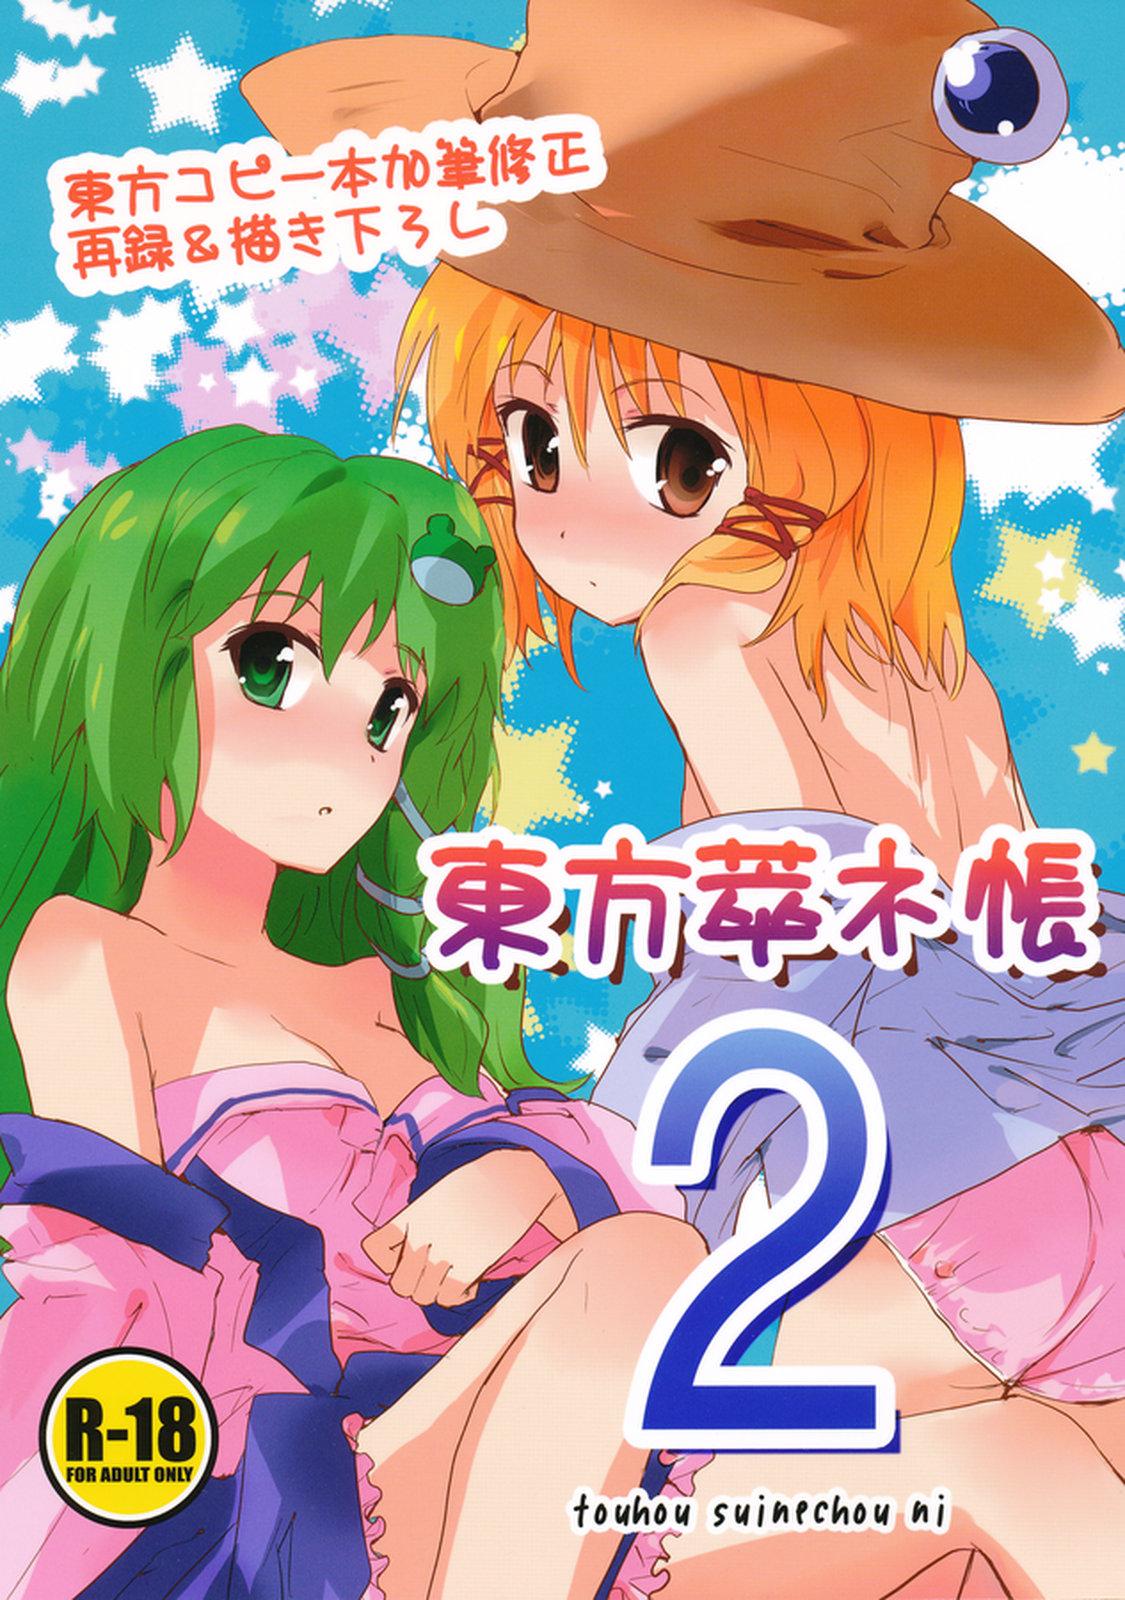 Anal Sex Touhou Suinechou 2 - Touhou project Por - Picture 1